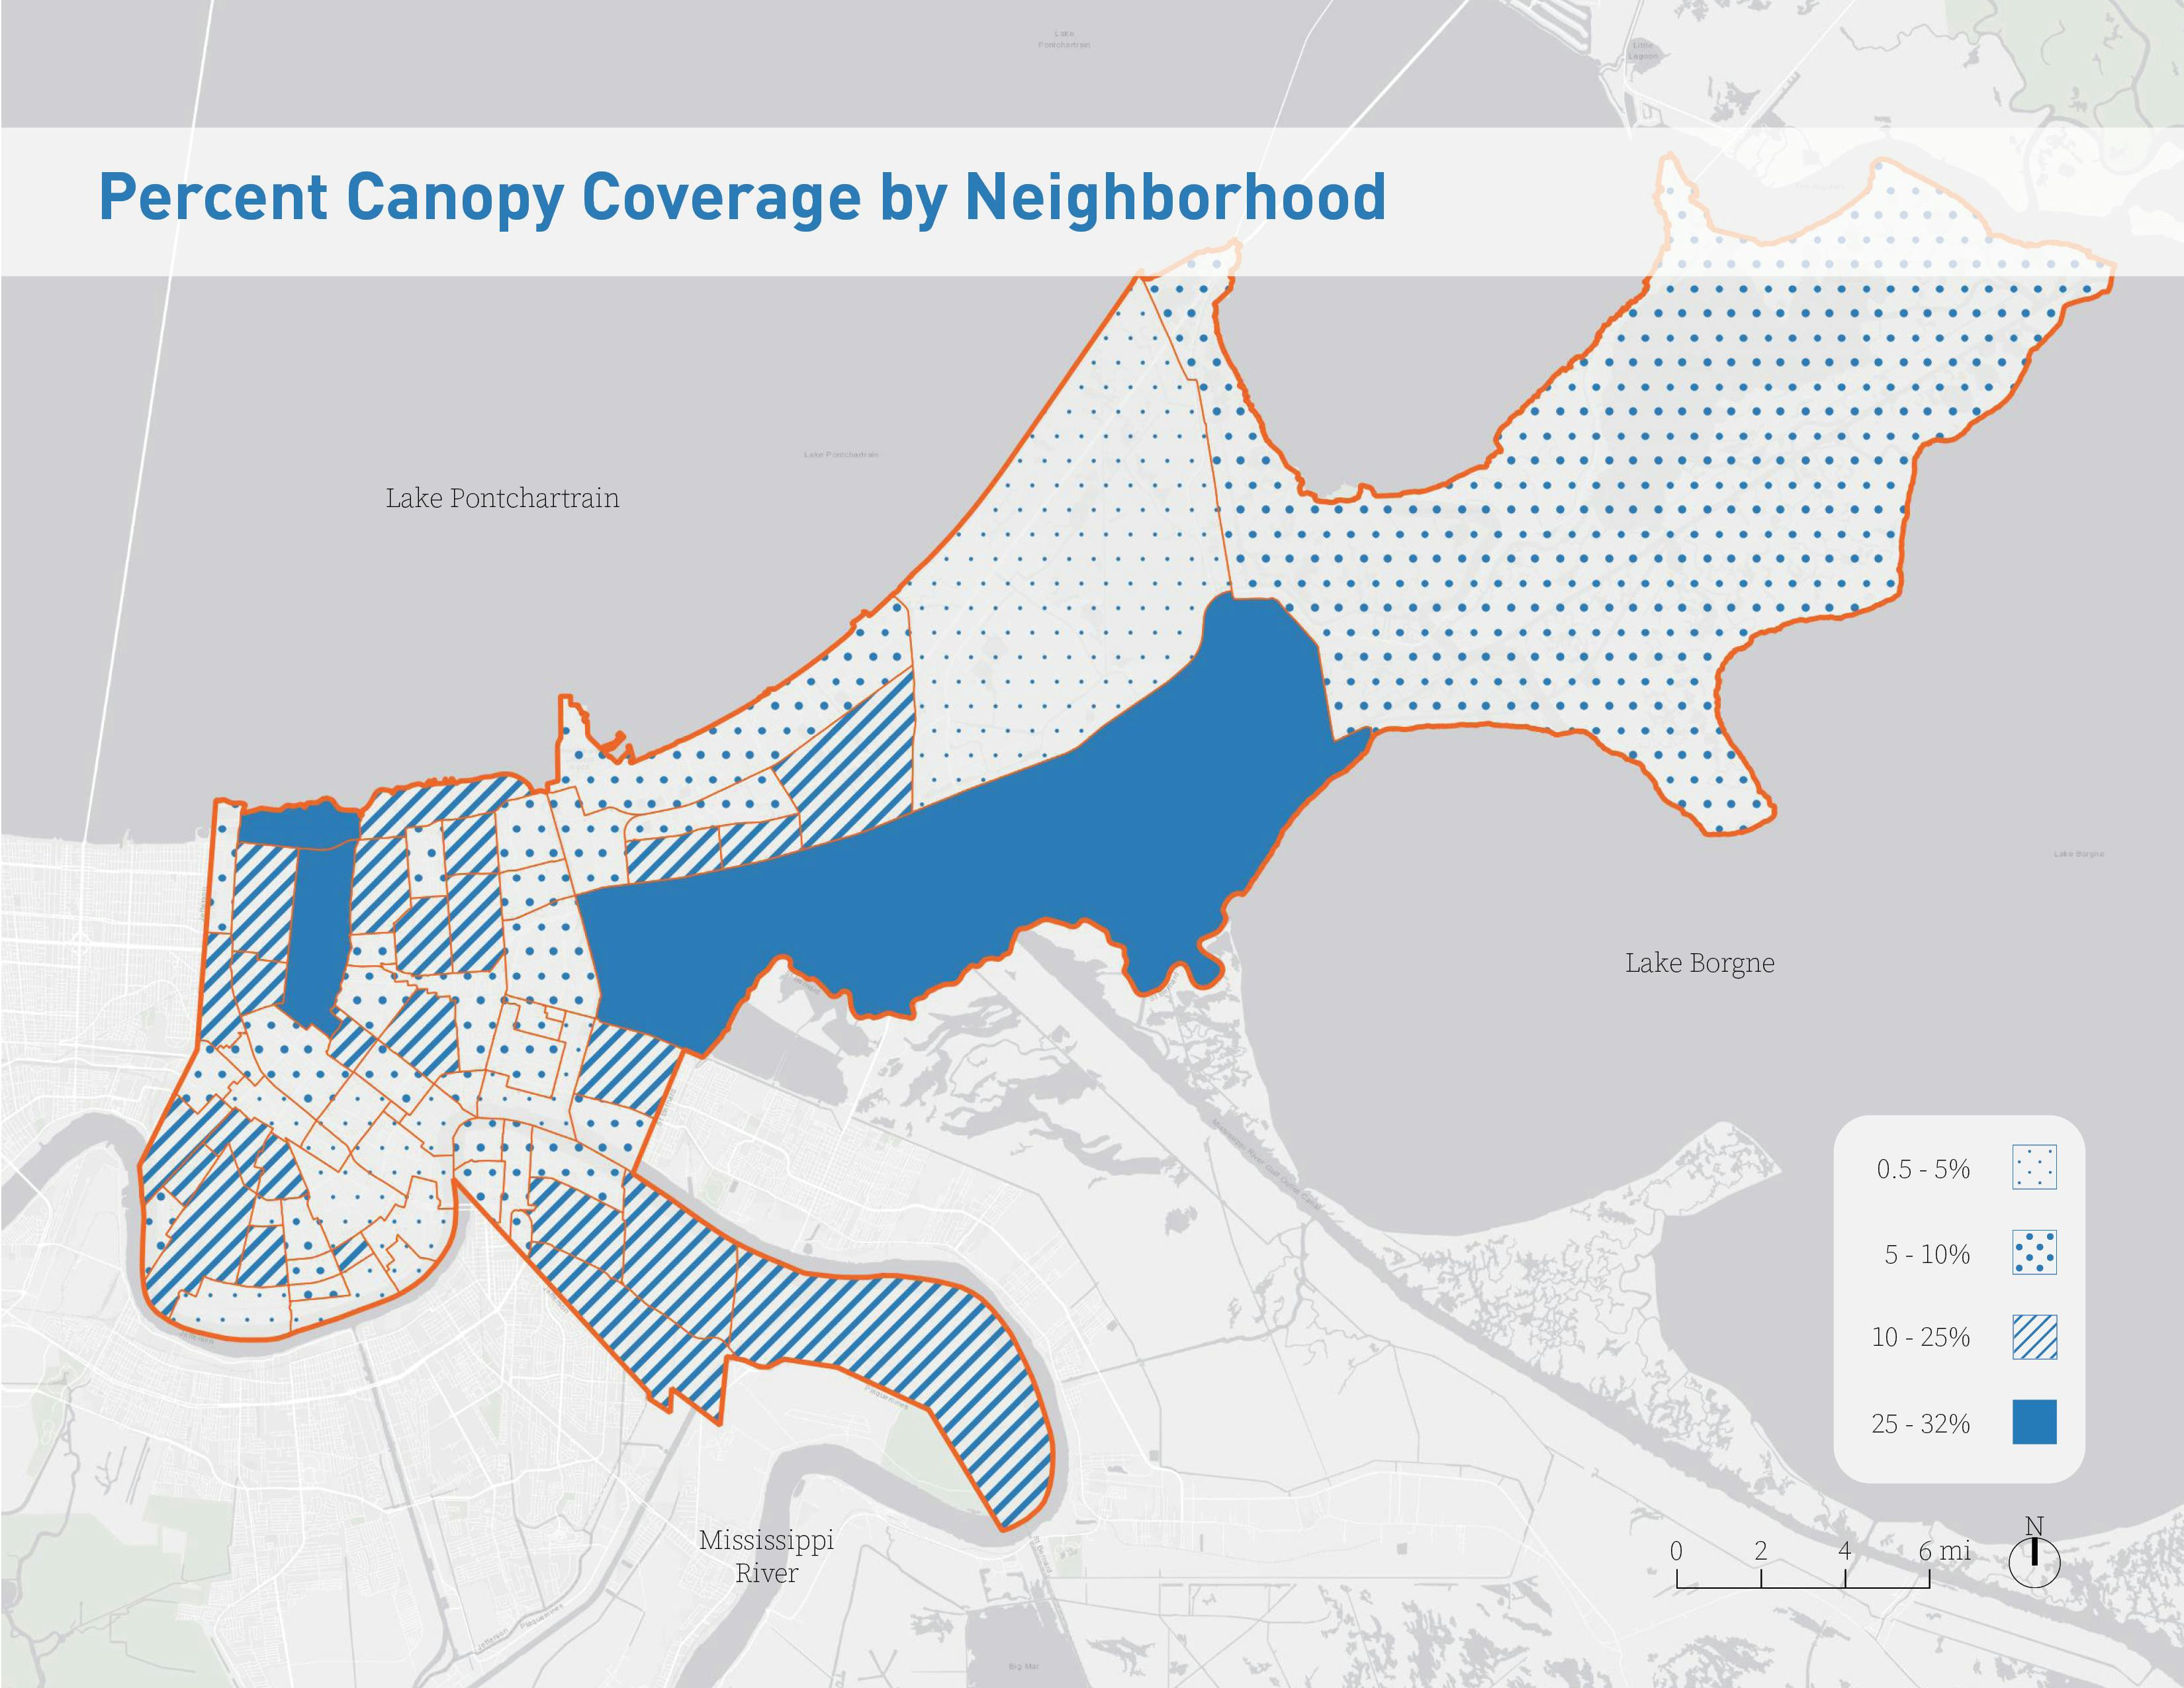 A map illustrating less than half of the 72 neighborhoods in New Orleans have less than 10% canopy coverage and only 25% to 32% canopy cover at most.